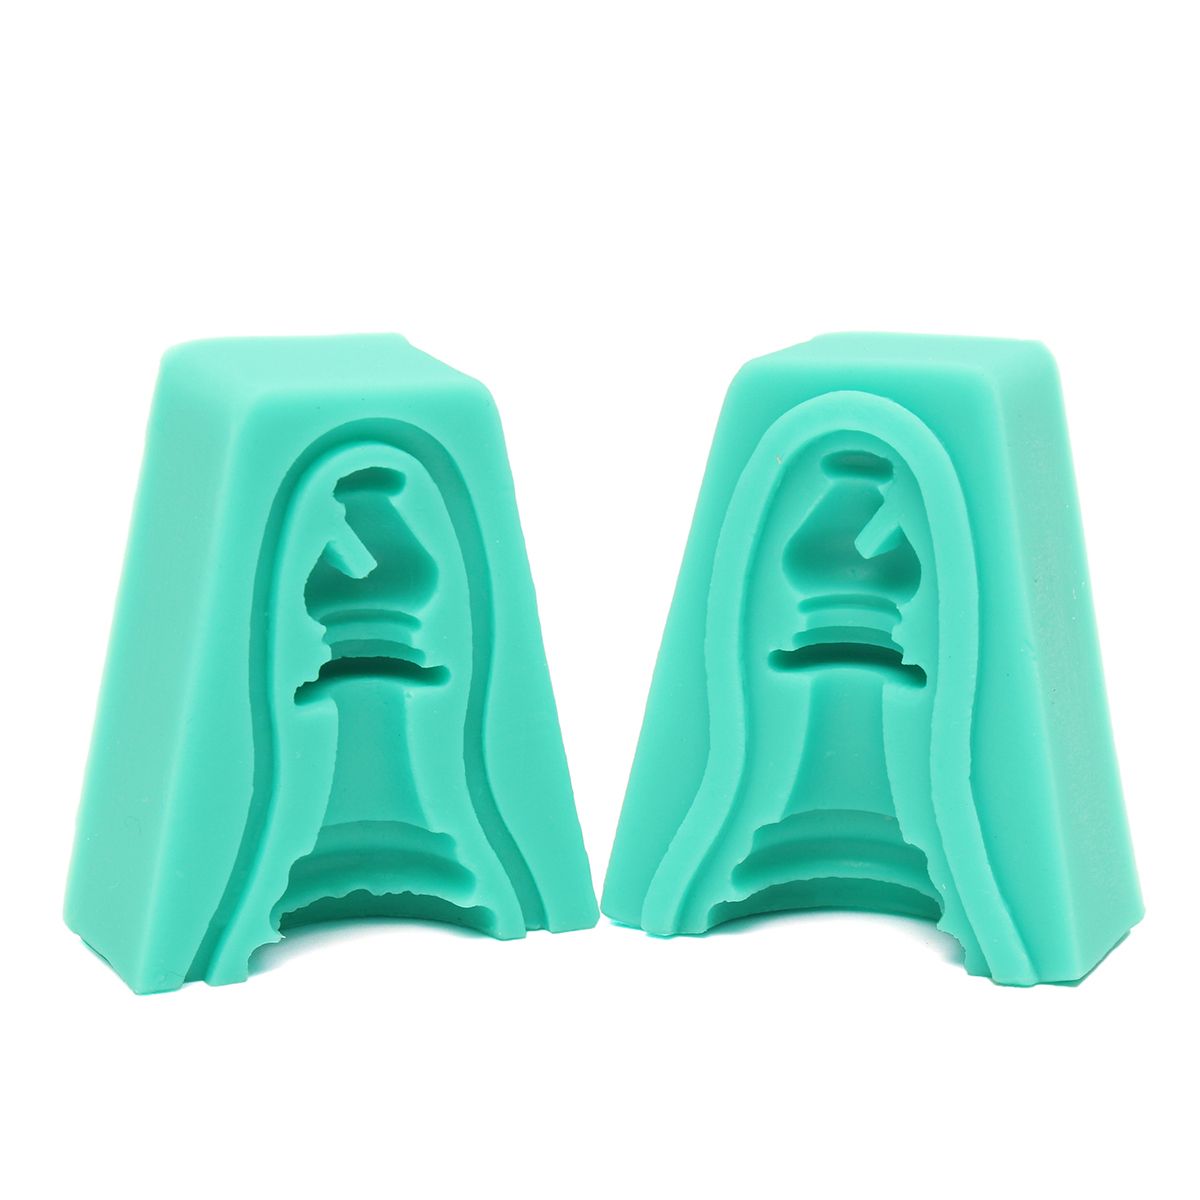 6-Sets-3D-Silicone-Fondant-Cake-International-Chess-Mold-Chocolate-Cupcake-Candy-Mould-Soap-Tool-1141477